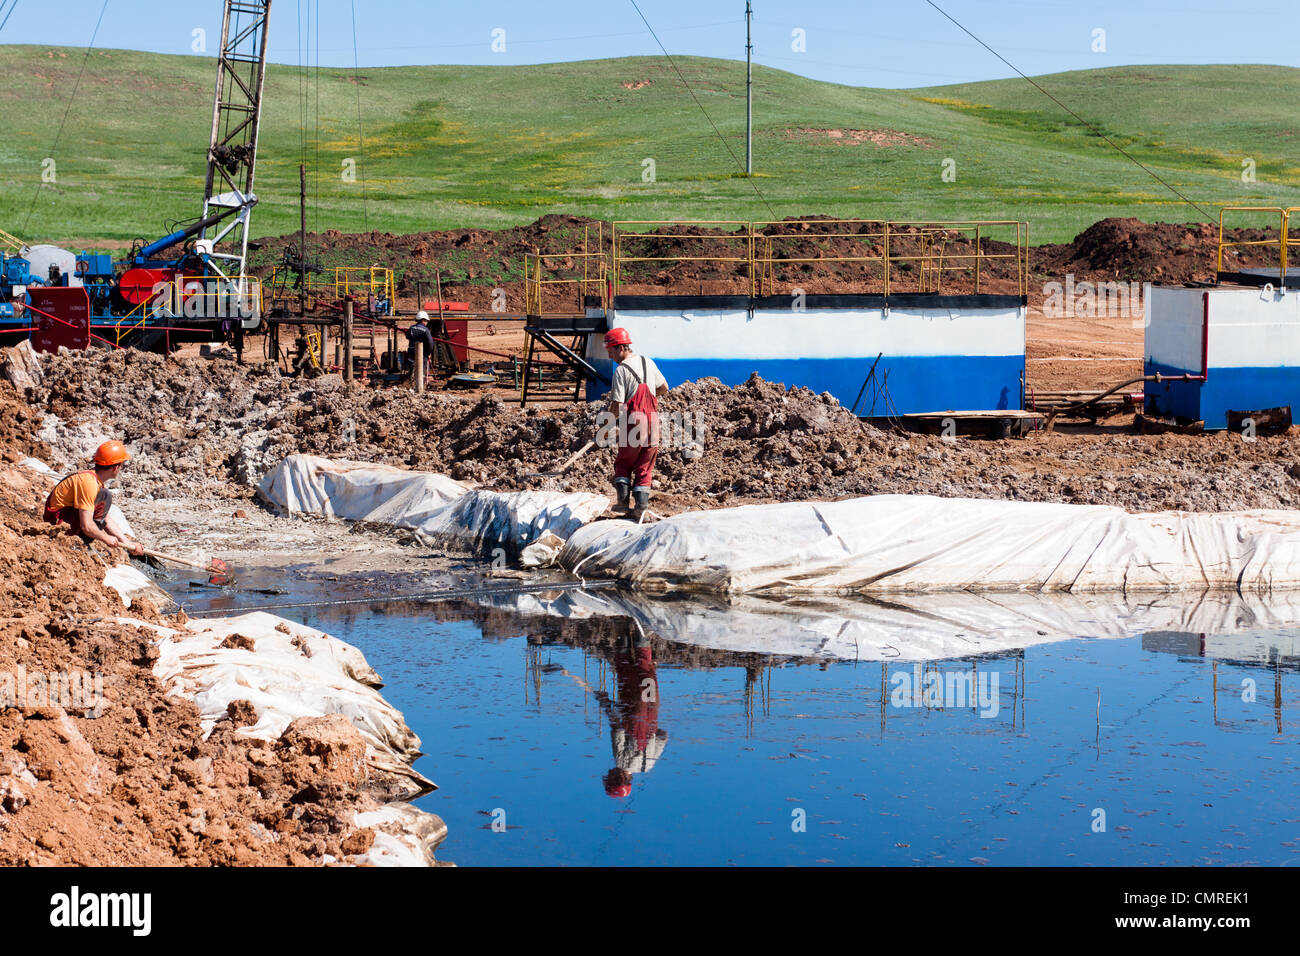 Workers collected oil and debris from the surface of the drilling waste water. Stock Photo